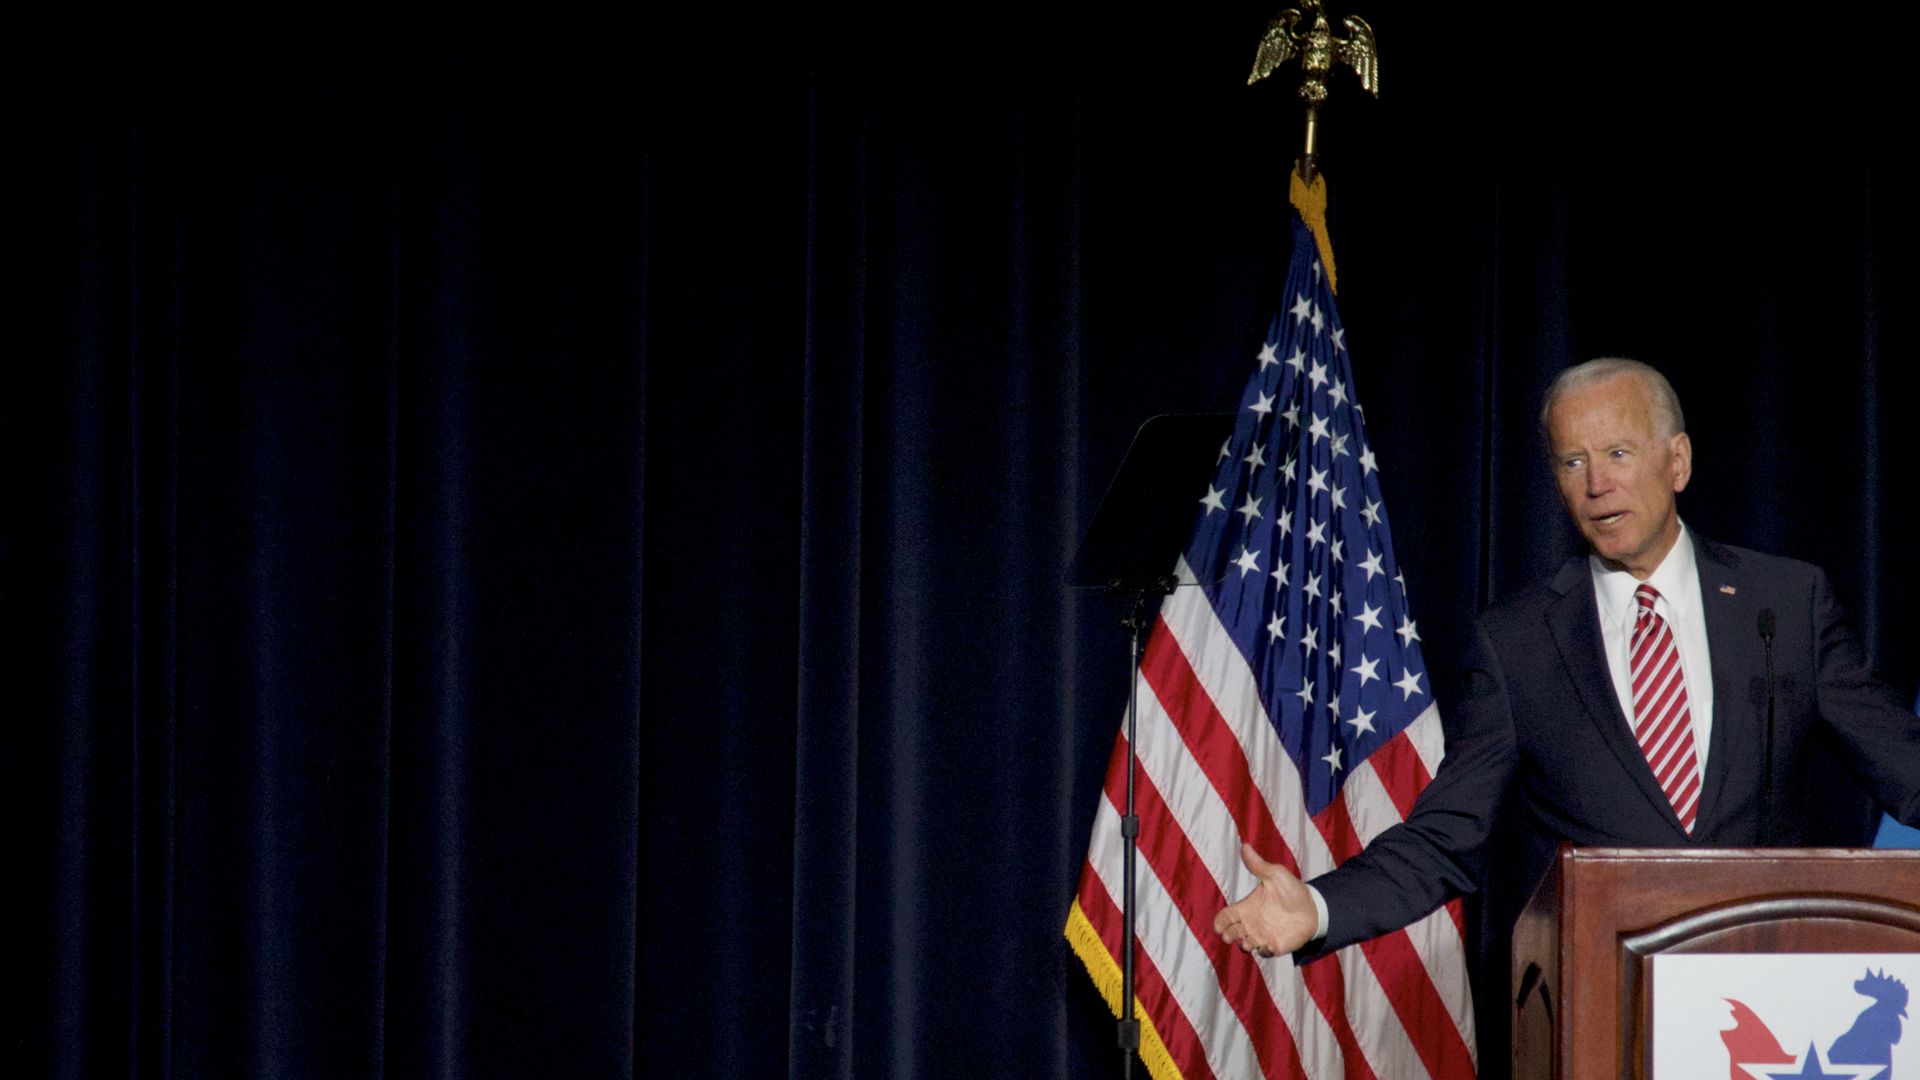 In this image, Biden gestures his arms outwards from behind a podium on stage. The American flag is behind him.